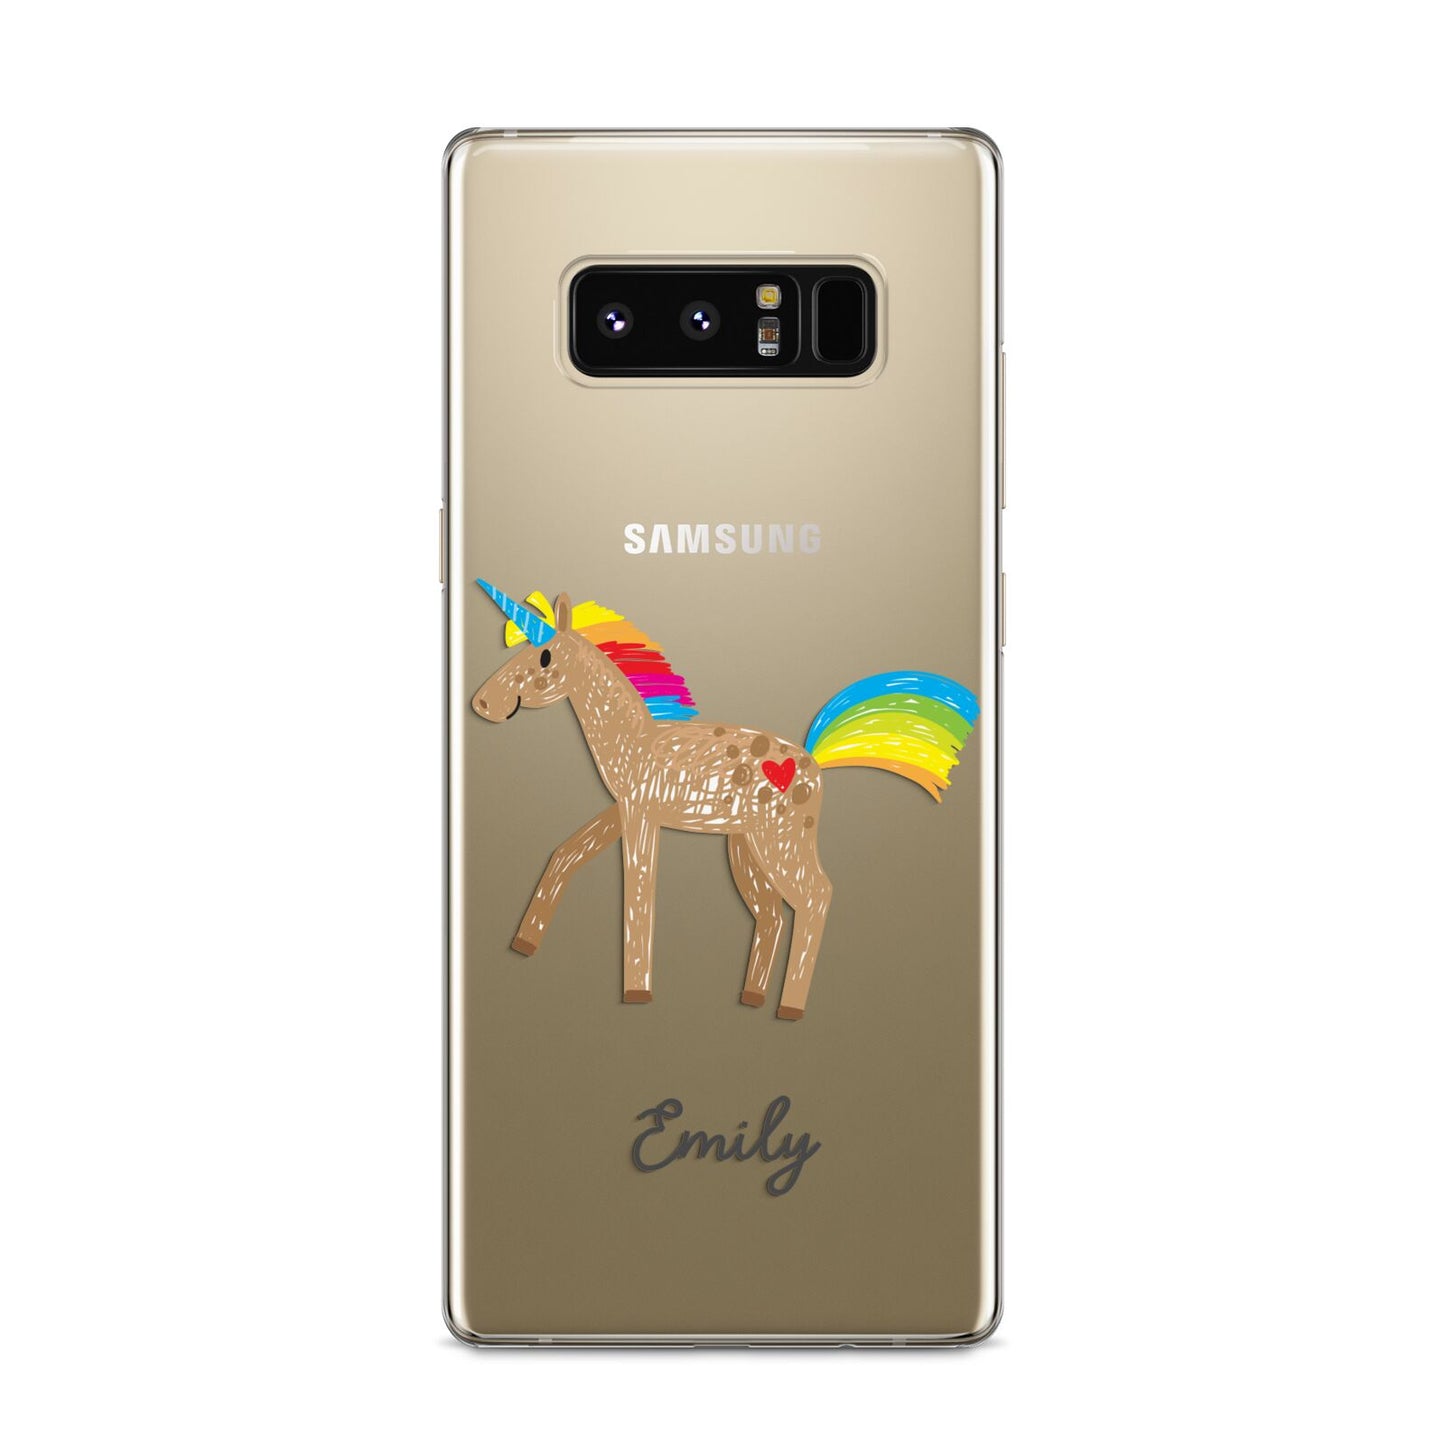 Personalised Unicorn with Name Samsung Galaxy S8 Case